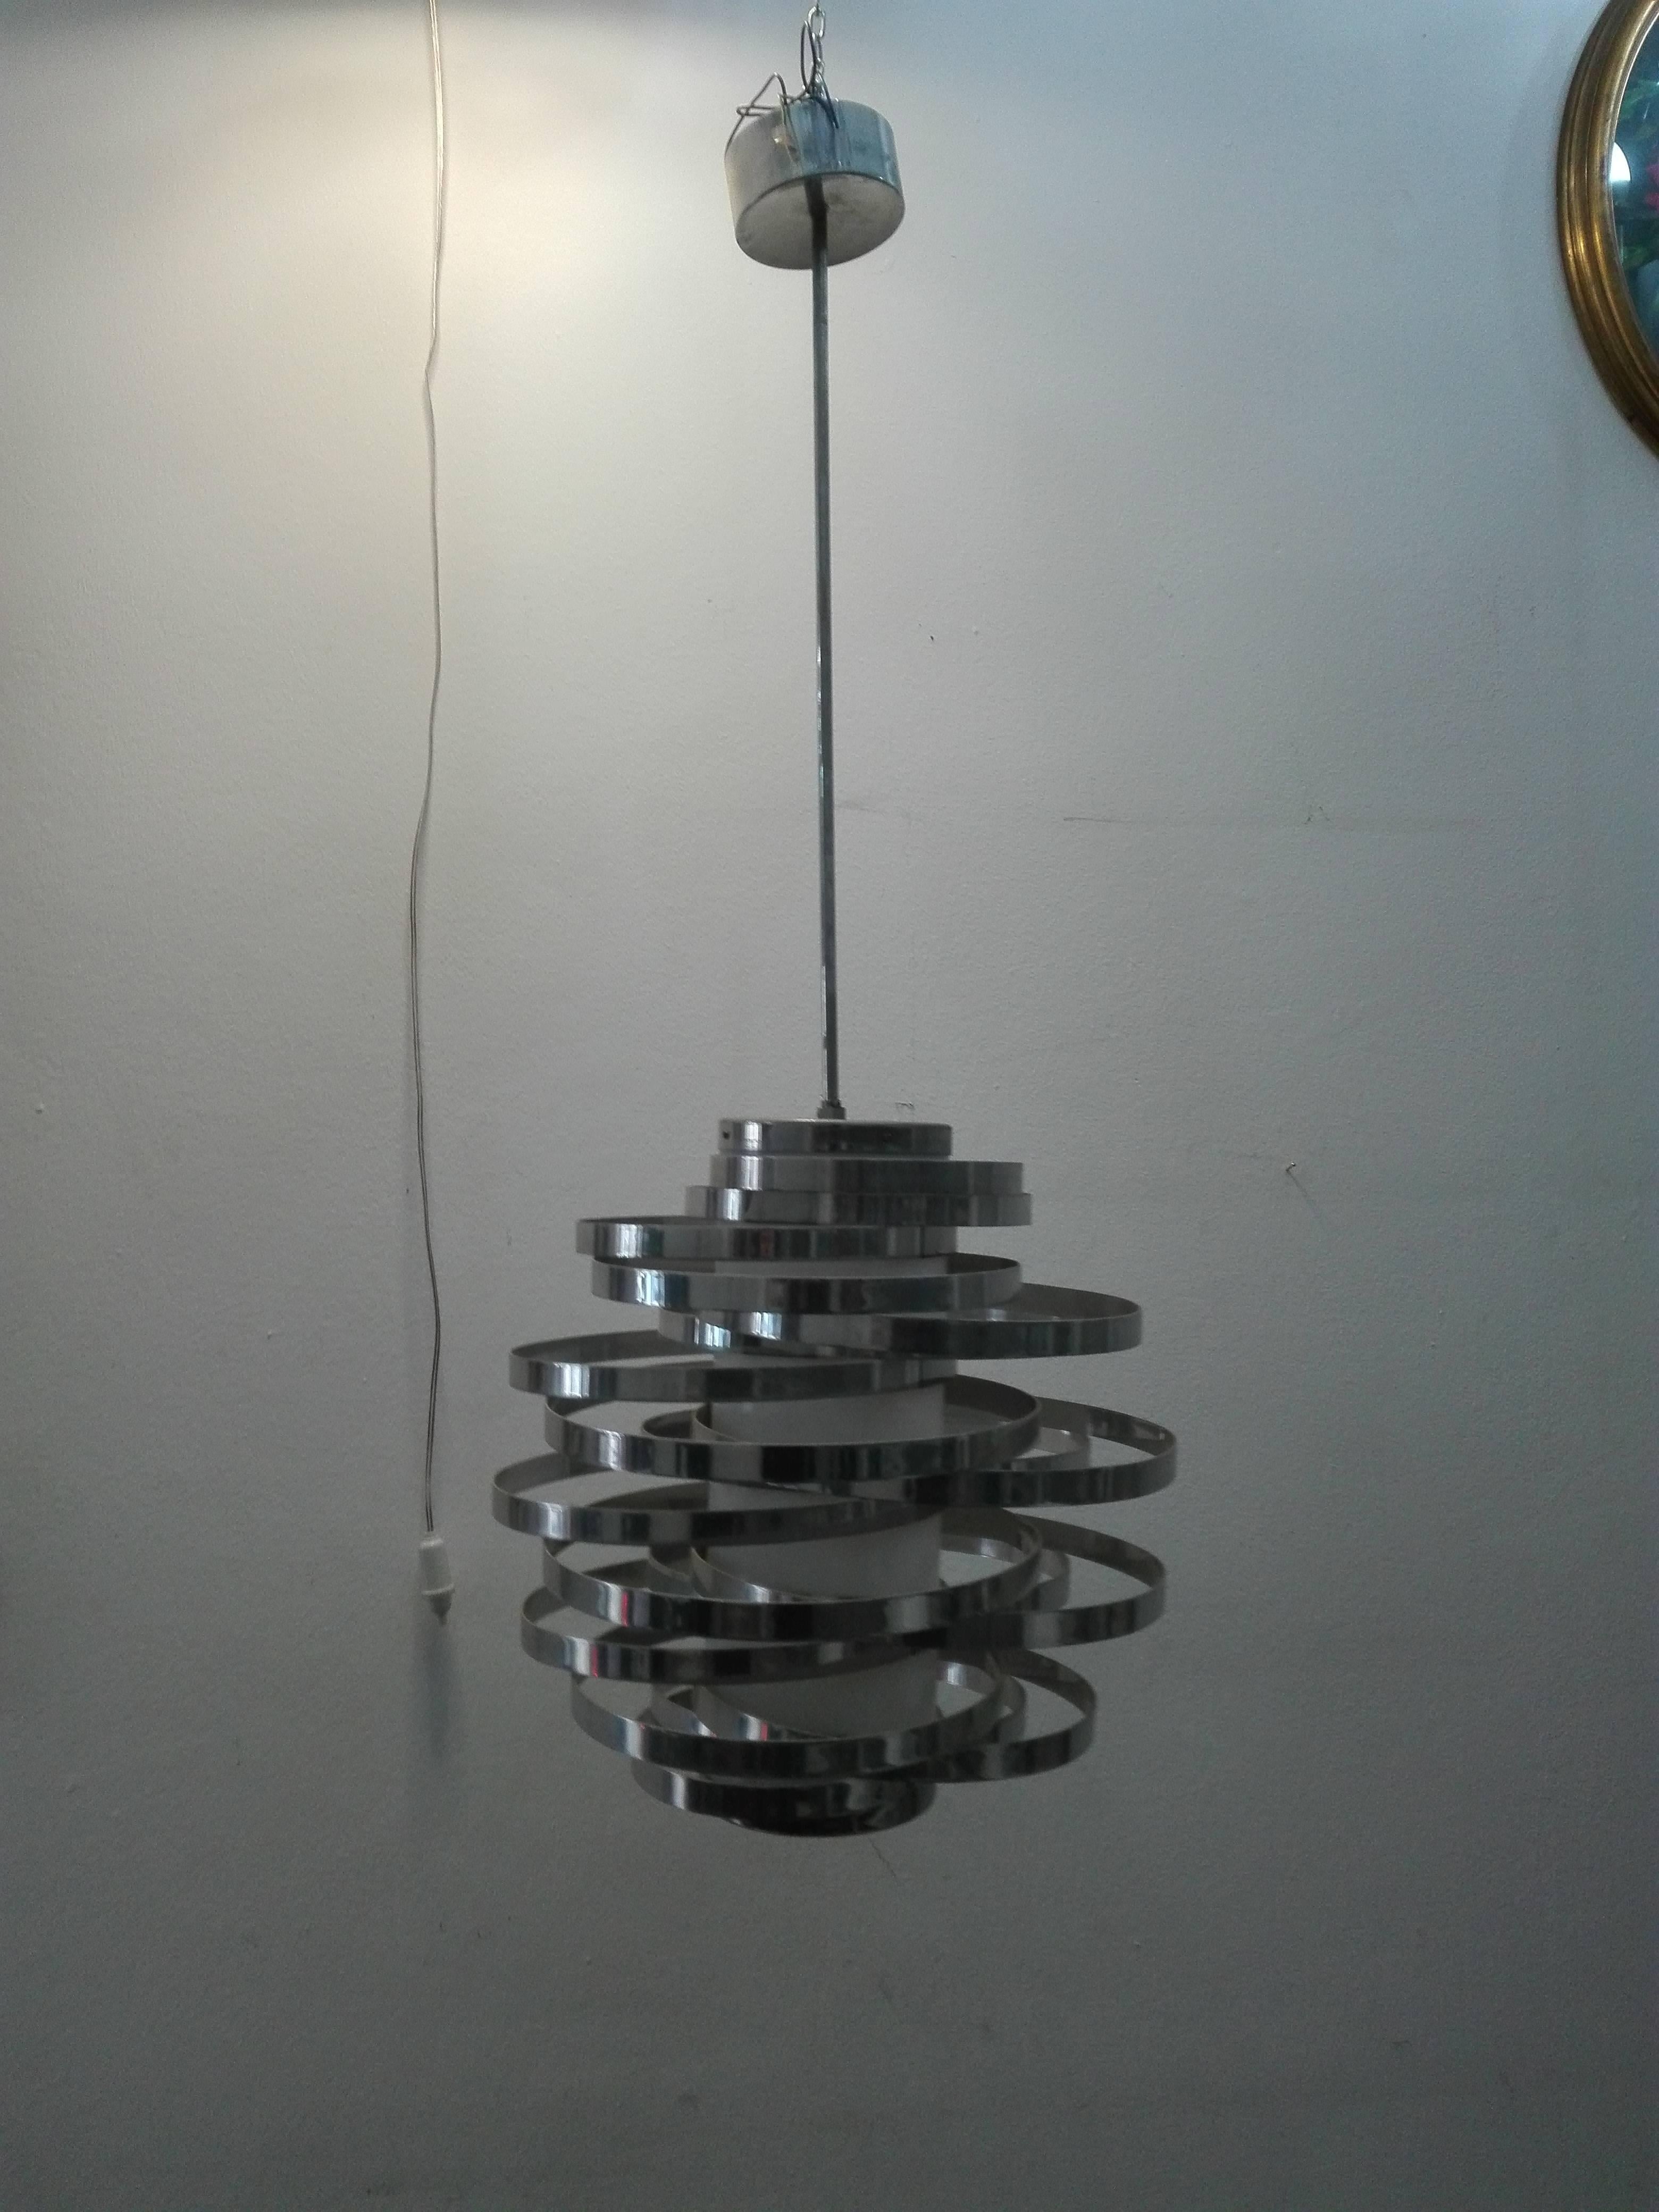 An iconic piece of Italian design from the 1970s, the Cyclone chandelier, produced by Sciolari, Rome, circa 1970. It is composed of aluminium rings fixed around a perspex tube with a spiral geometry. It has an E27 screw lamp holder.